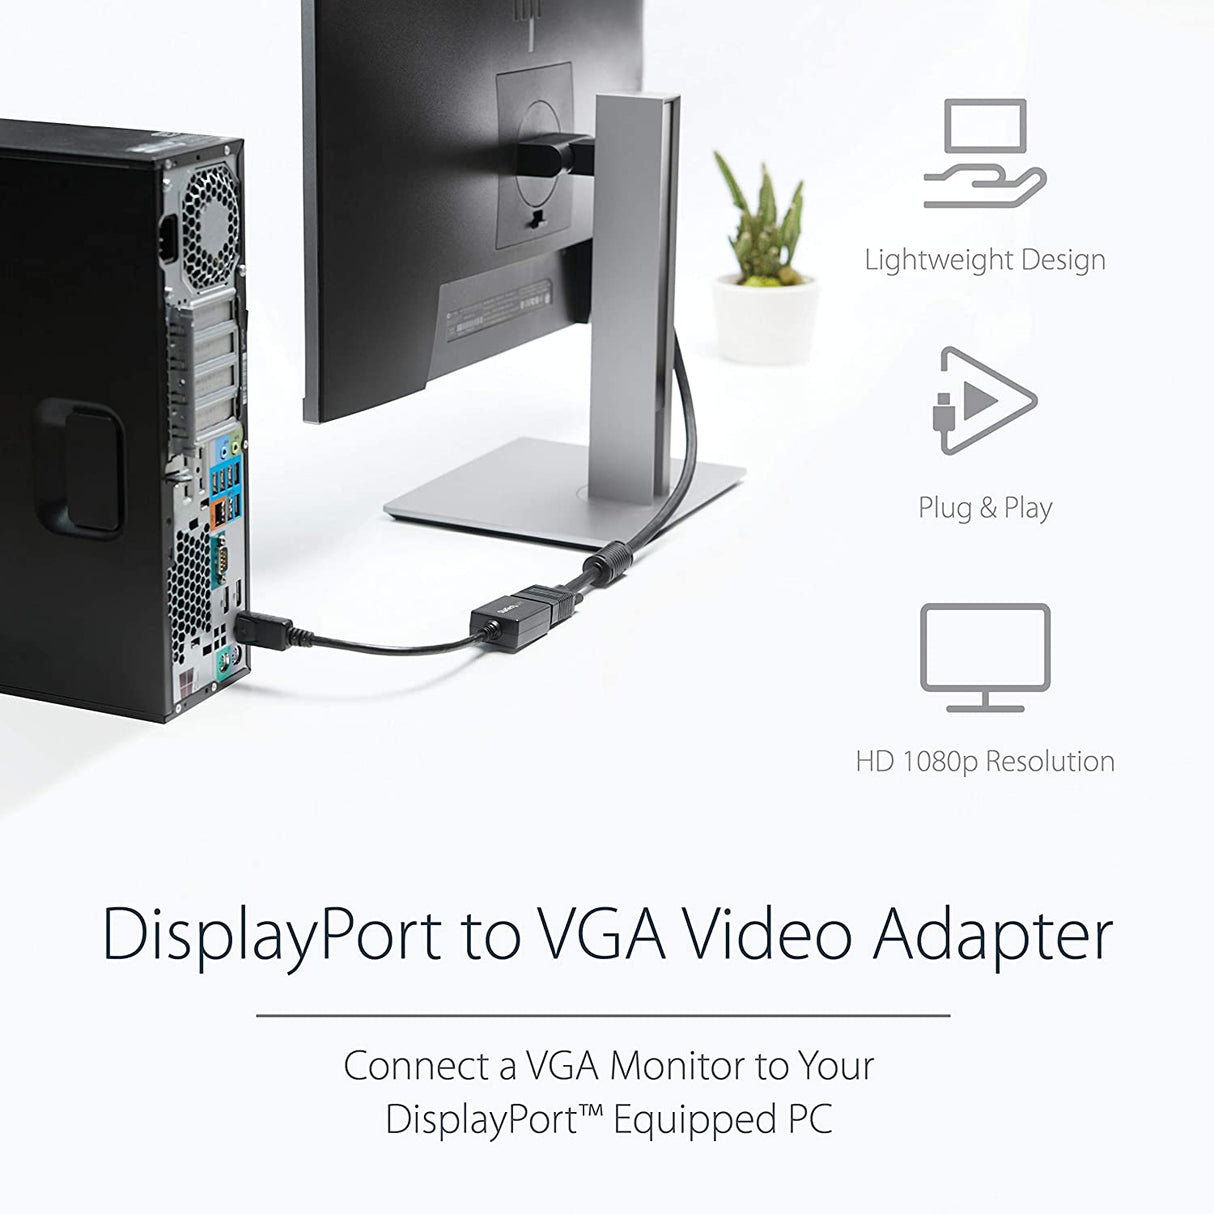 StarTech.com DisplayPort to VGA Adapter - Active DP to VGA Converter - 1080p Video - DisplayPort Certified - DP/DP++ Source to VGA Monitor Cable Adapter Dongle - Latching DP Connector (DP2VGA2) 8 inches